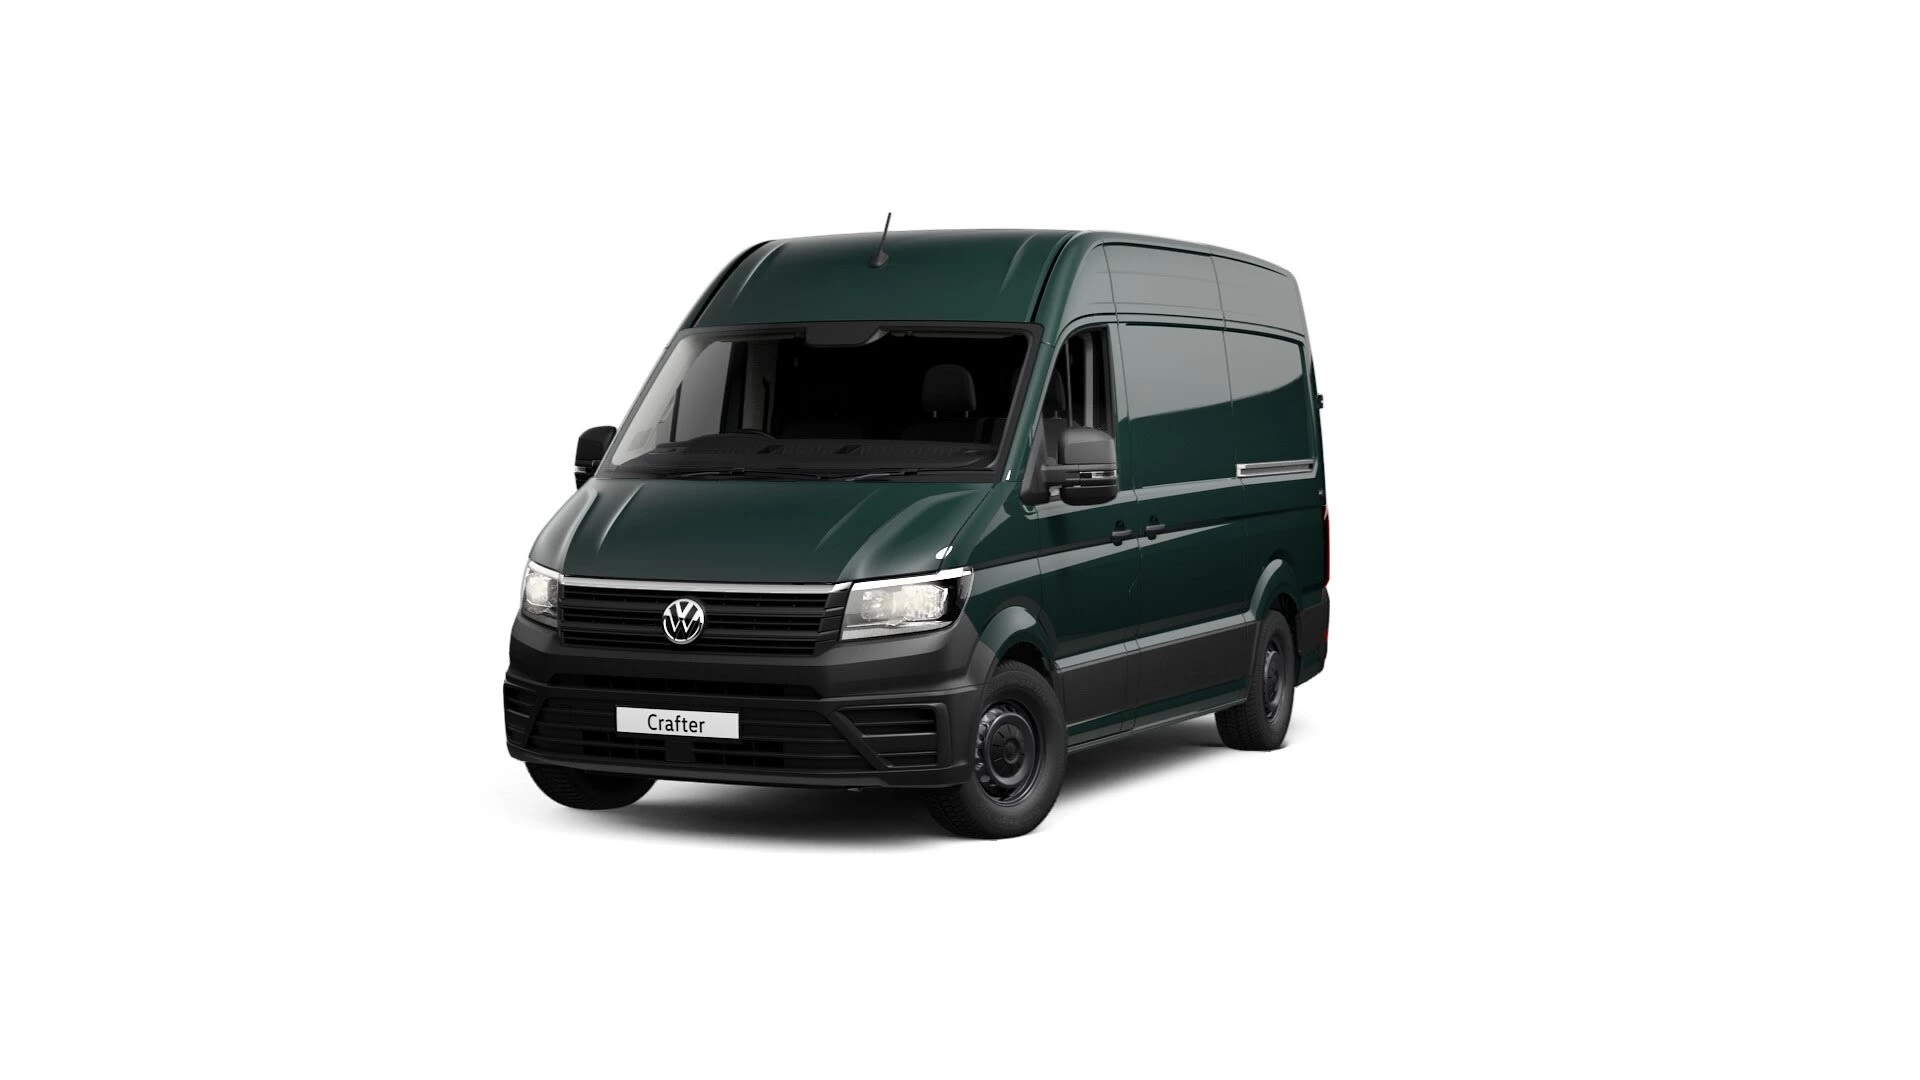 New Volkswagen Crafter For Sale in Scotland